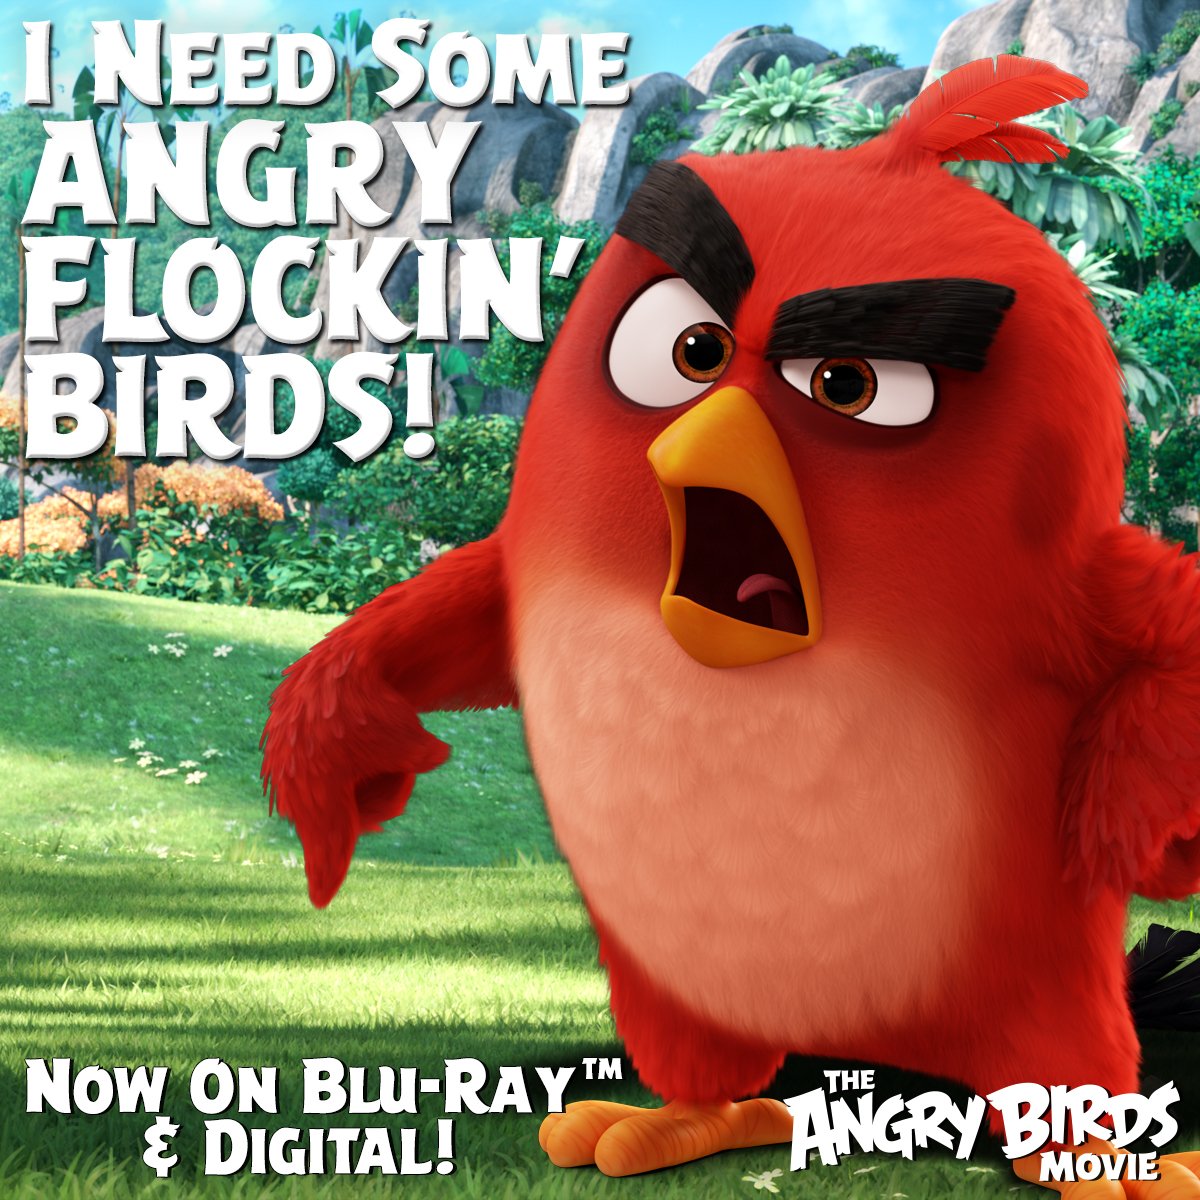 Red The Angry Bird On Twitter See Red Chuck And Bomb Save The Day In Angrybirdsmovie Now Httpstcomvh0krggyd Httpstcobdaelxmyiz Twitter